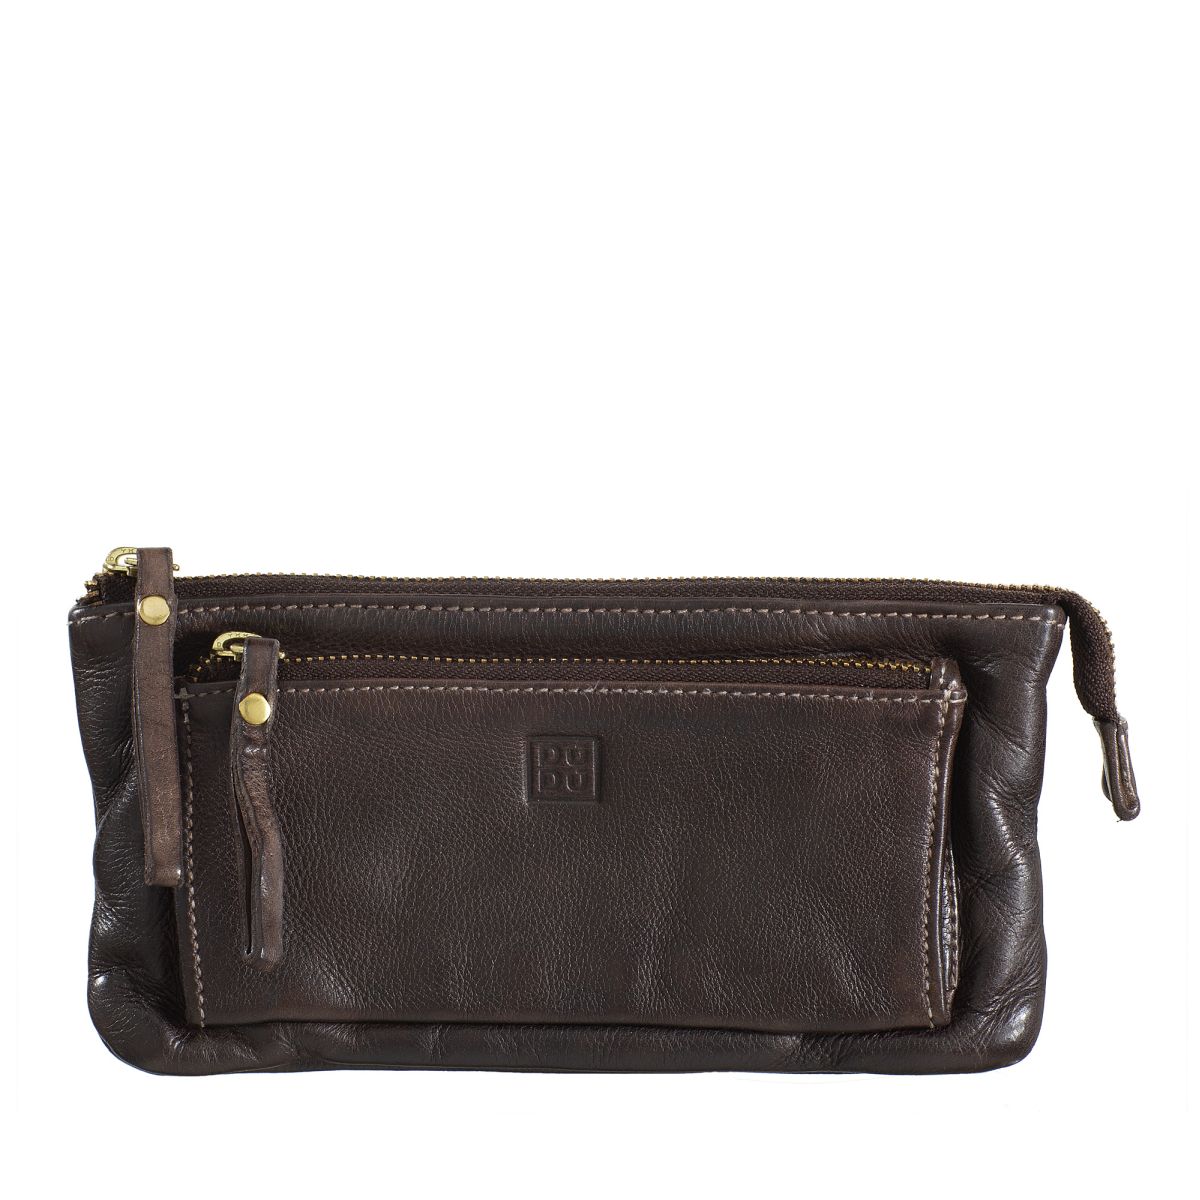 Woman's Hand-Made Soft Leather Purse - Dark Brown